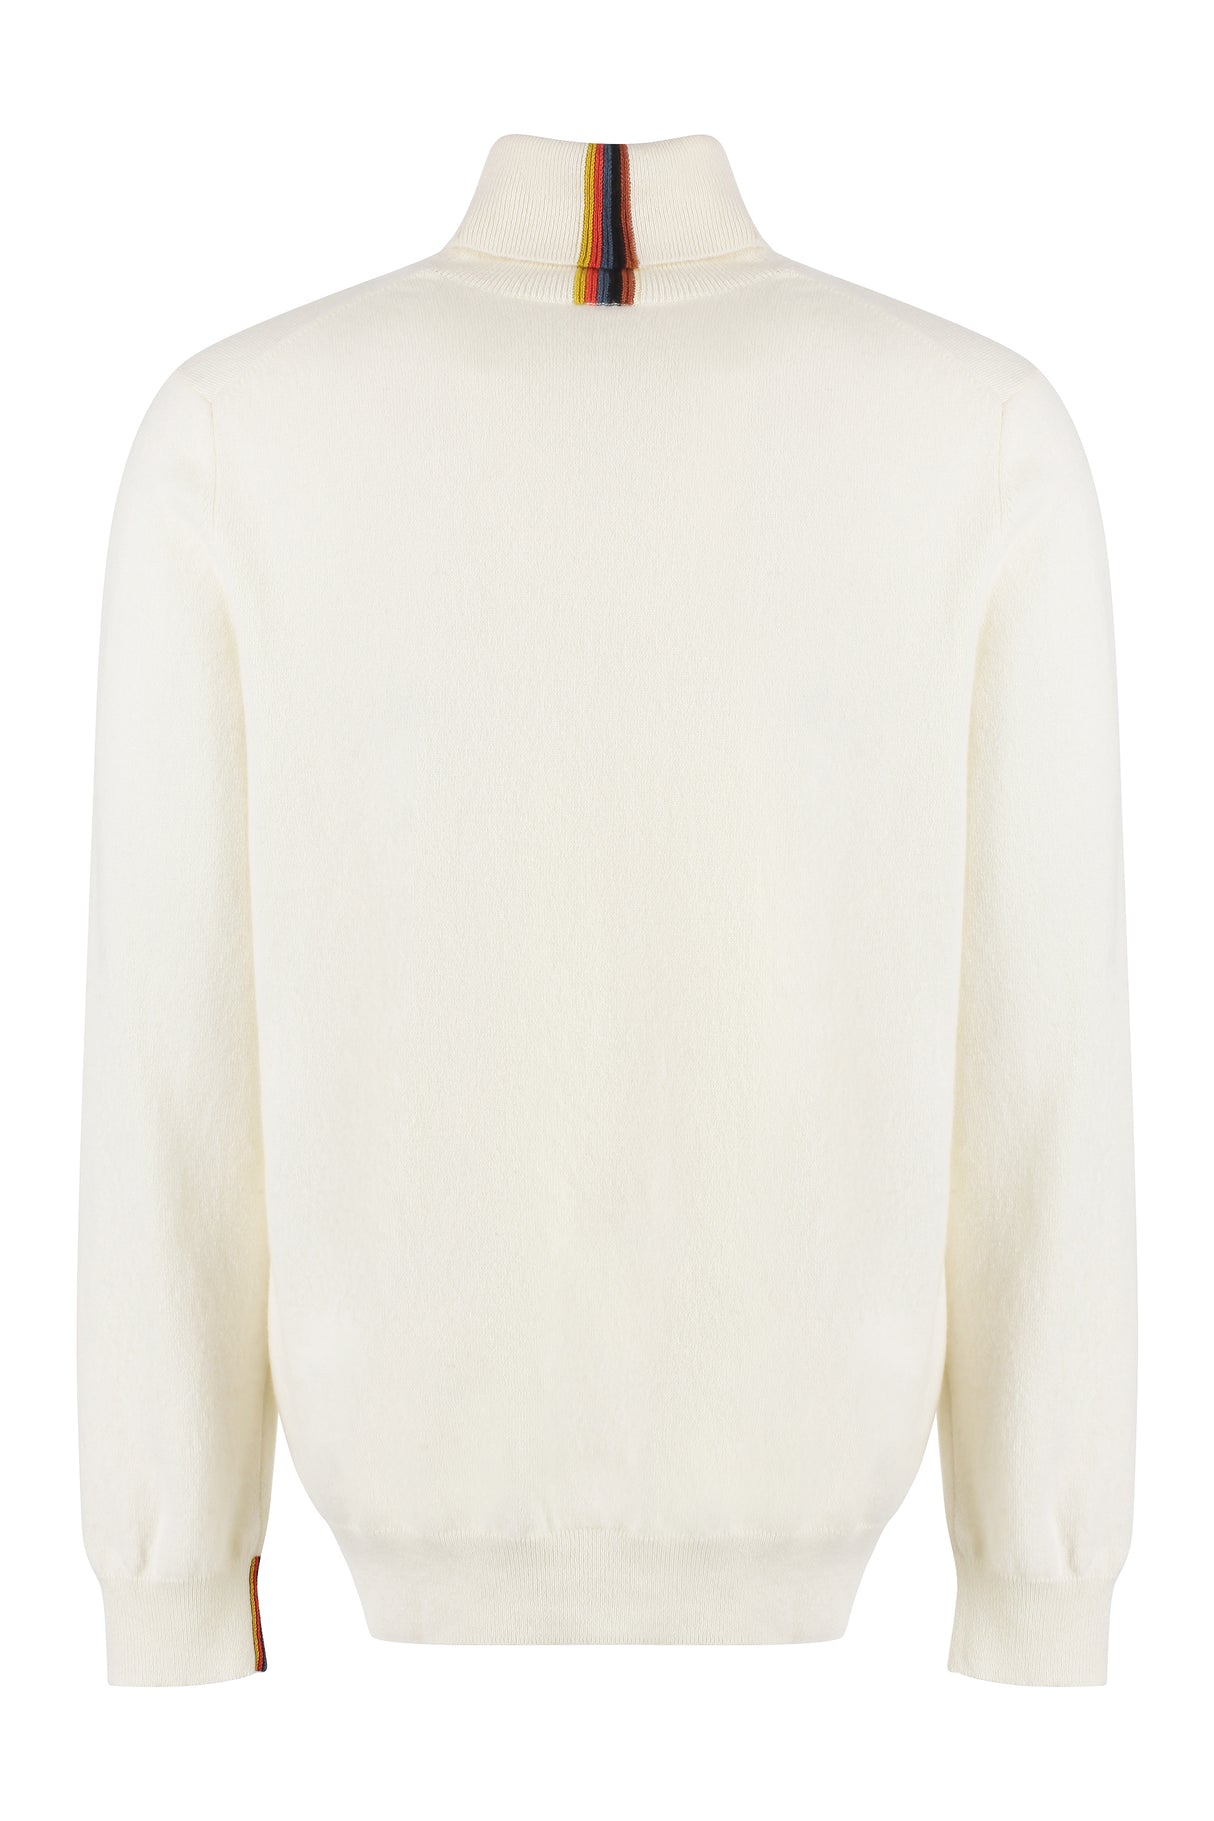 PAUL SMITH Men's White Cashmere Turtleneck Sweater for FW23